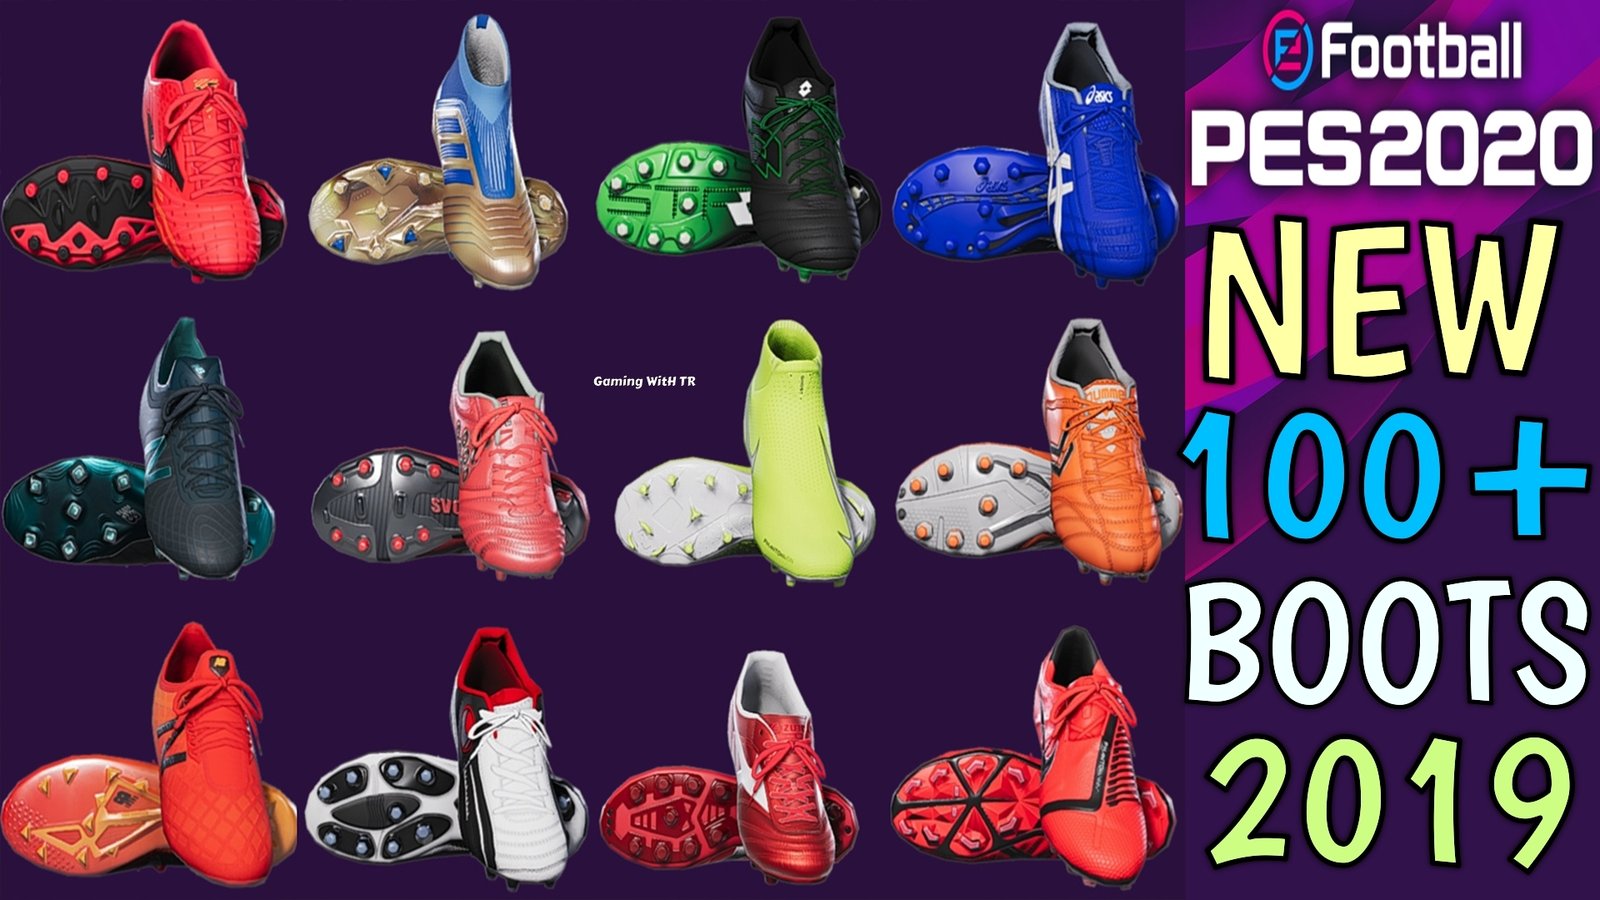 bootpack vol. 2 for efootball pes 2020 by ziyech